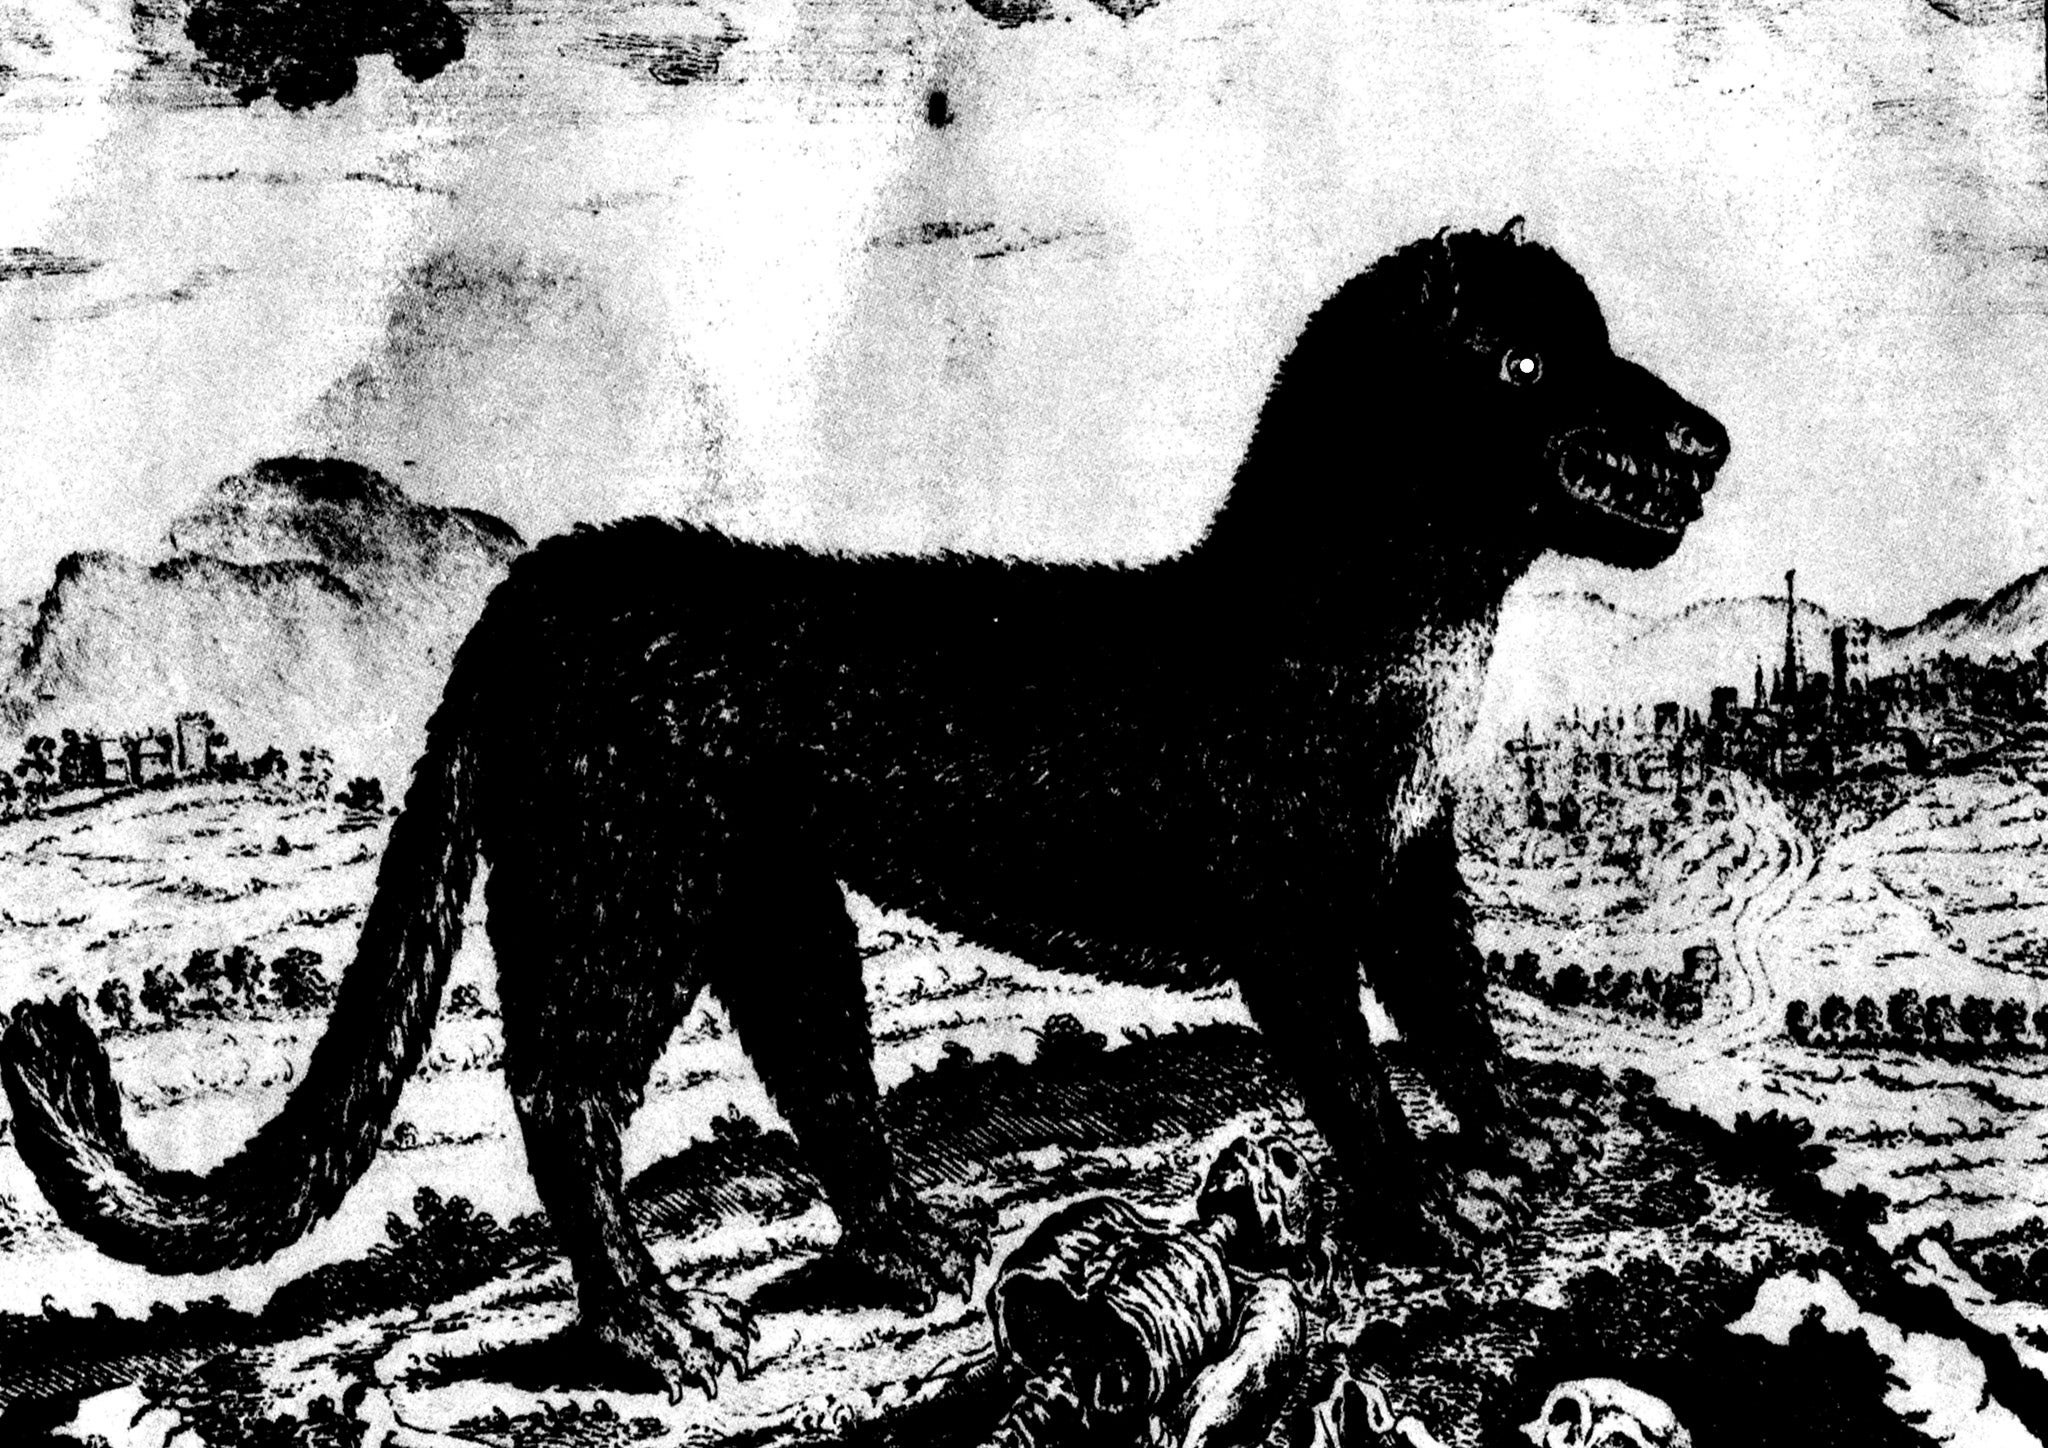 A black and white depiction of the Beast of GÃ©vaudan.